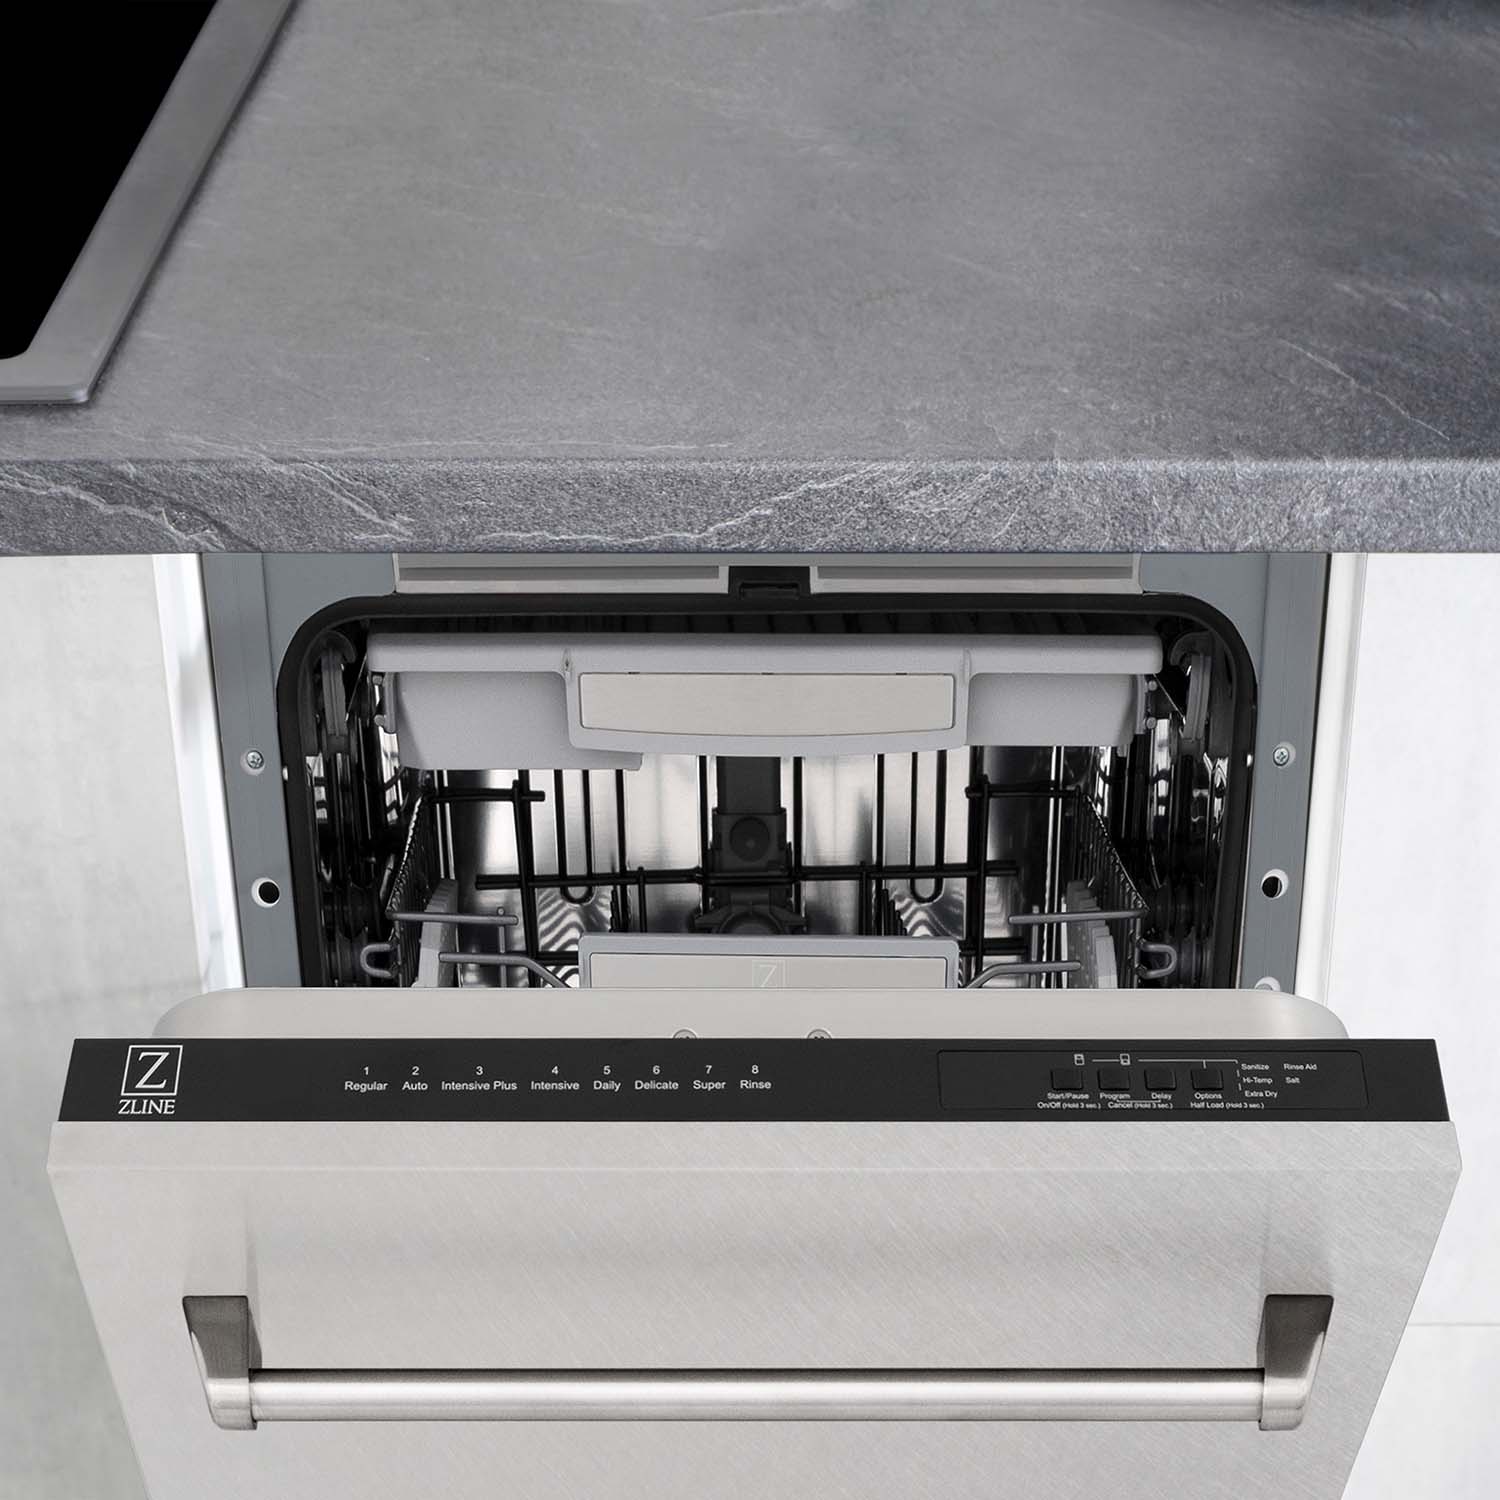 ZLINE 18" Tallac Series Dishwasher with DuraSnow Stainless Steel panel built-in to cabinetry.